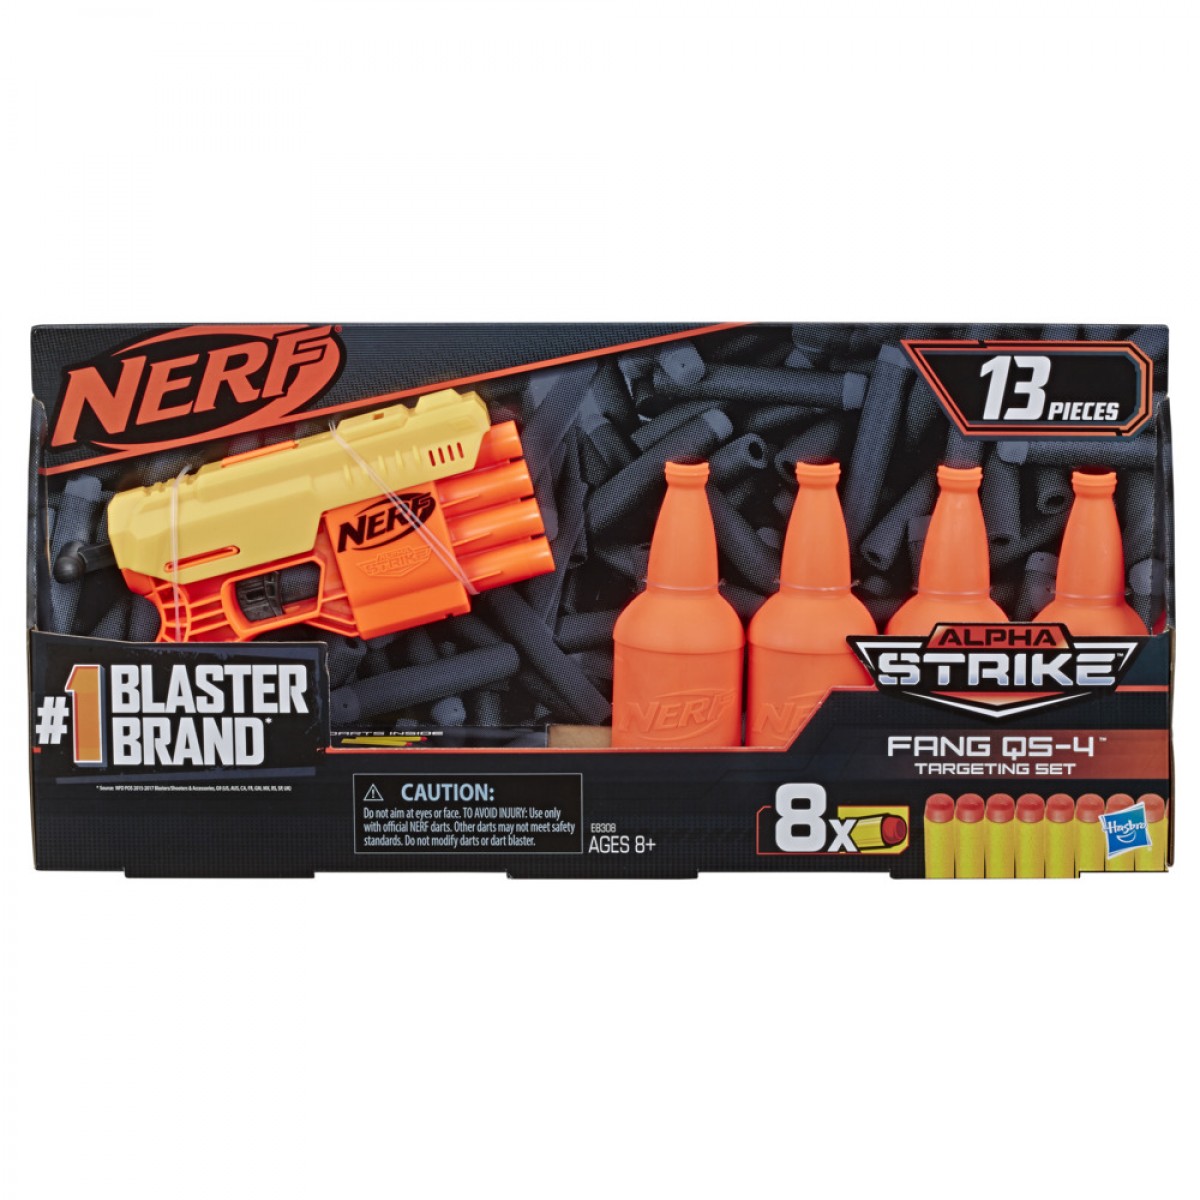 Fang Qs-4 Targeting Set -- 13-Piece Nerf Alpha Strike Set Includes Toy Blaster, 4 Half-Targets, And 8 Official Nerf Elite Darts For Kids, Teens, Adults